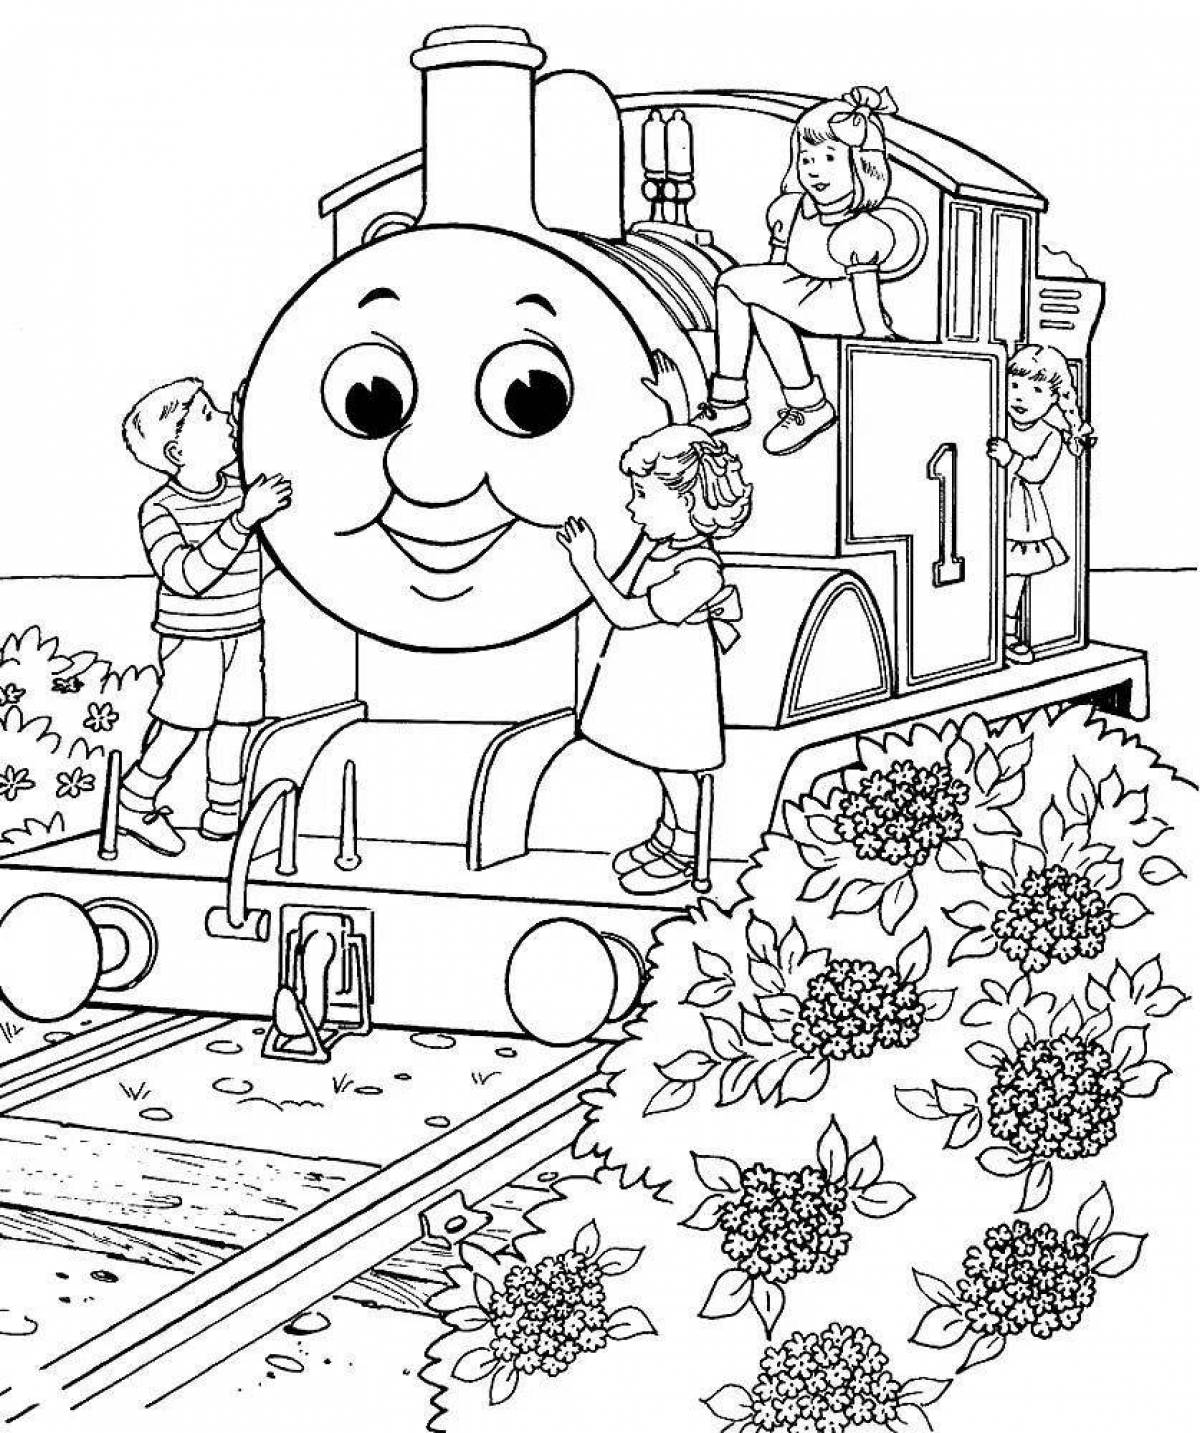 Outstanding thomas the tank engine coloring book for kids